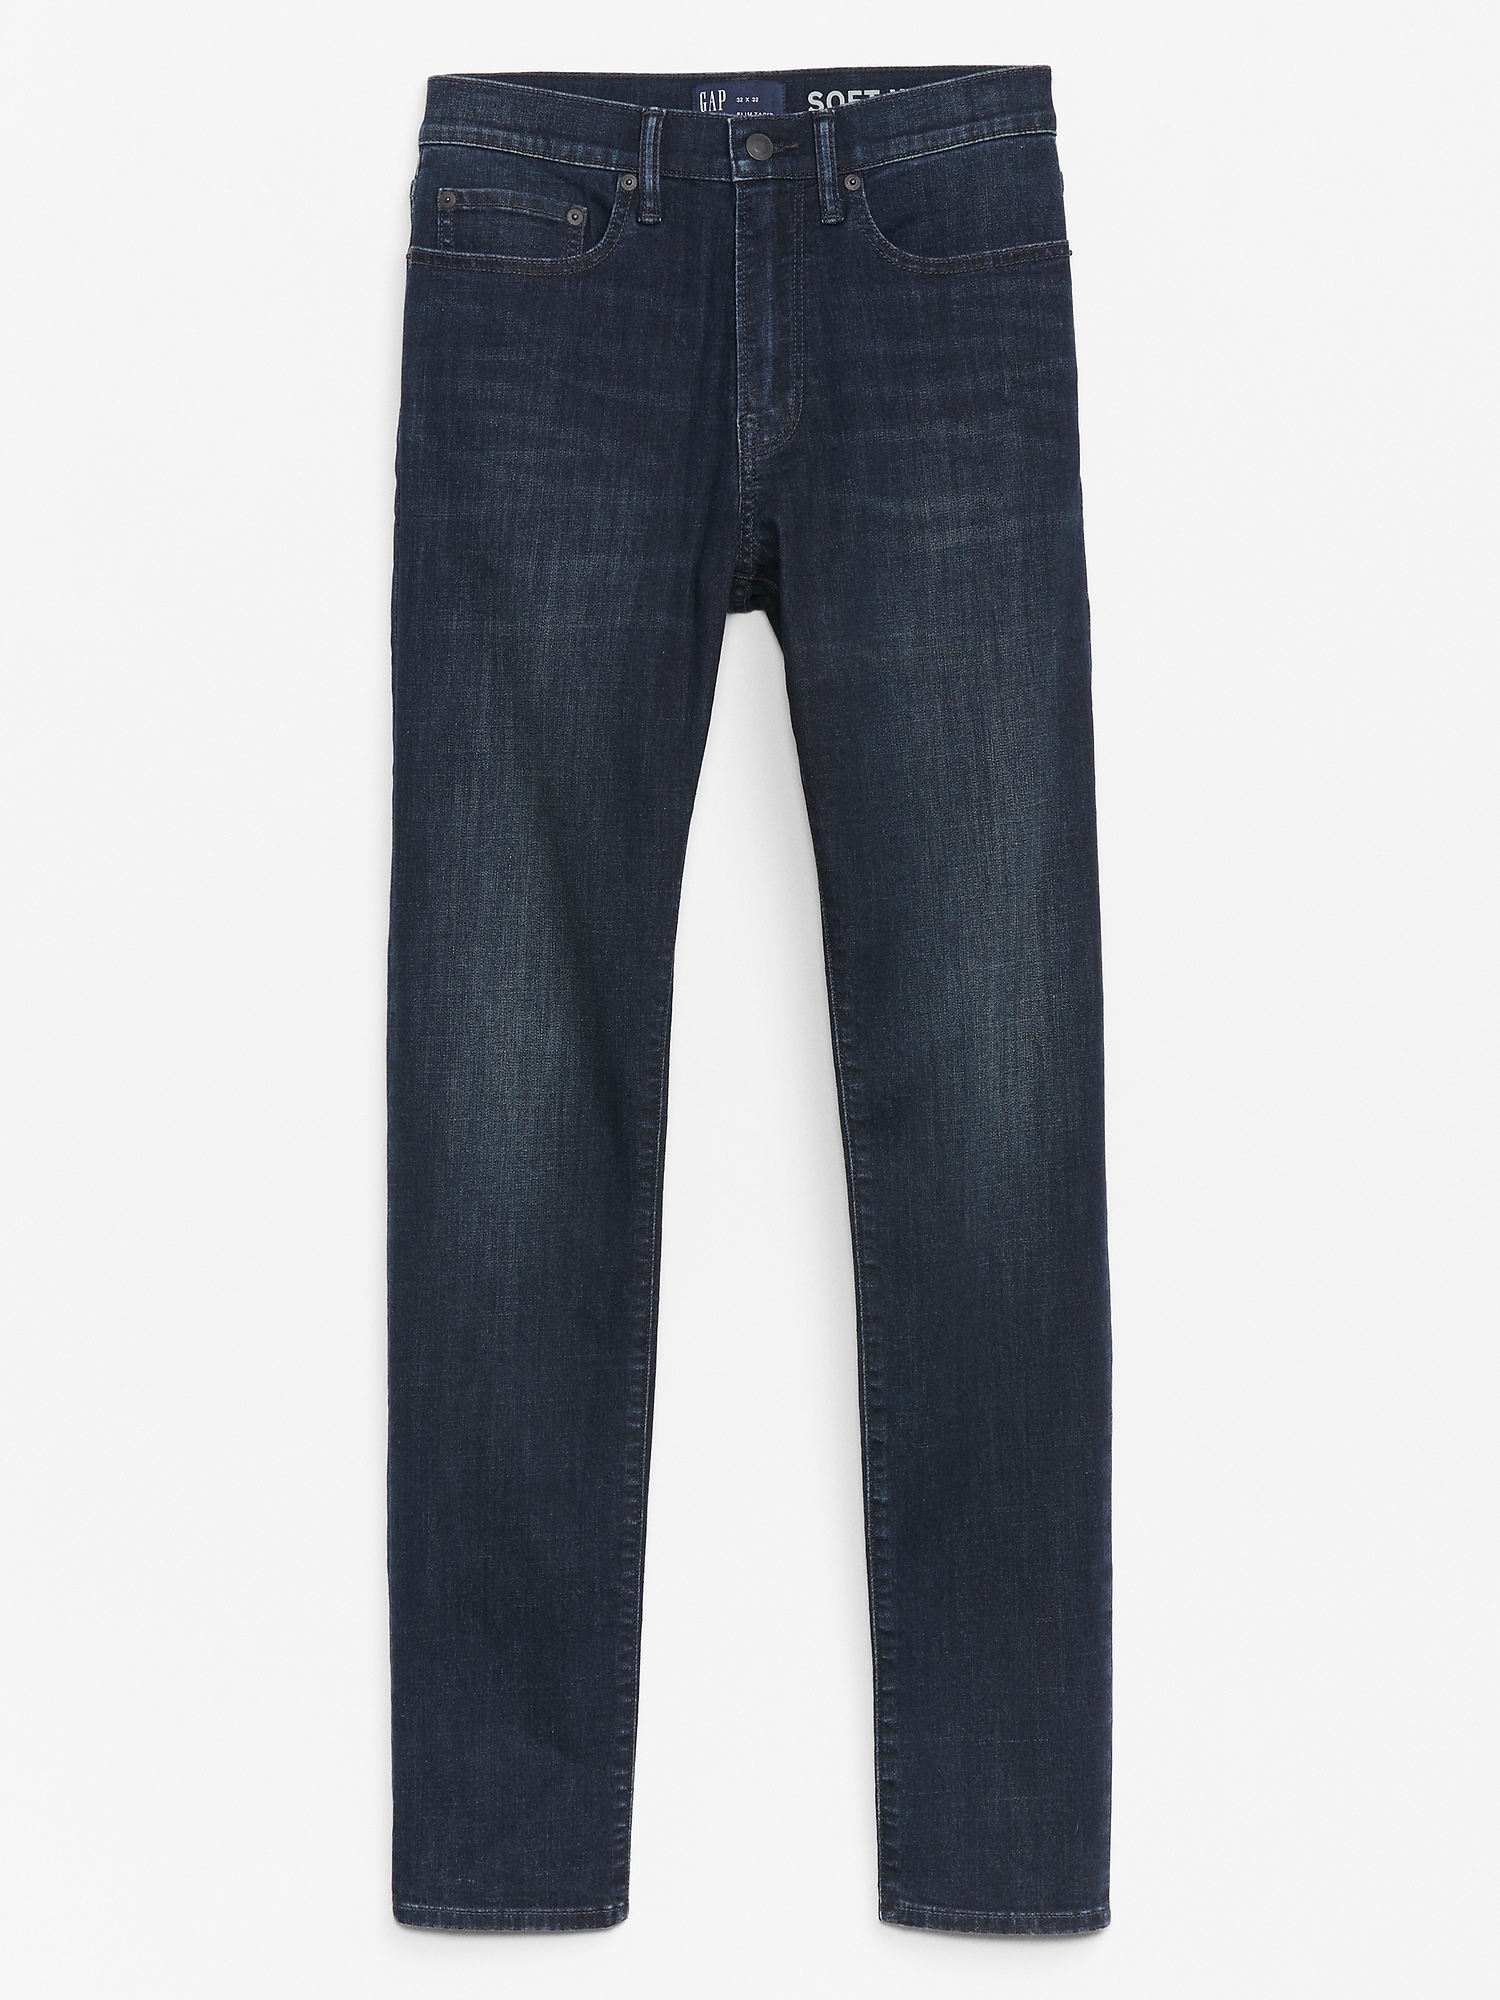 Soft Wear Slim Taper Jeans With Washwell | Gap Factory